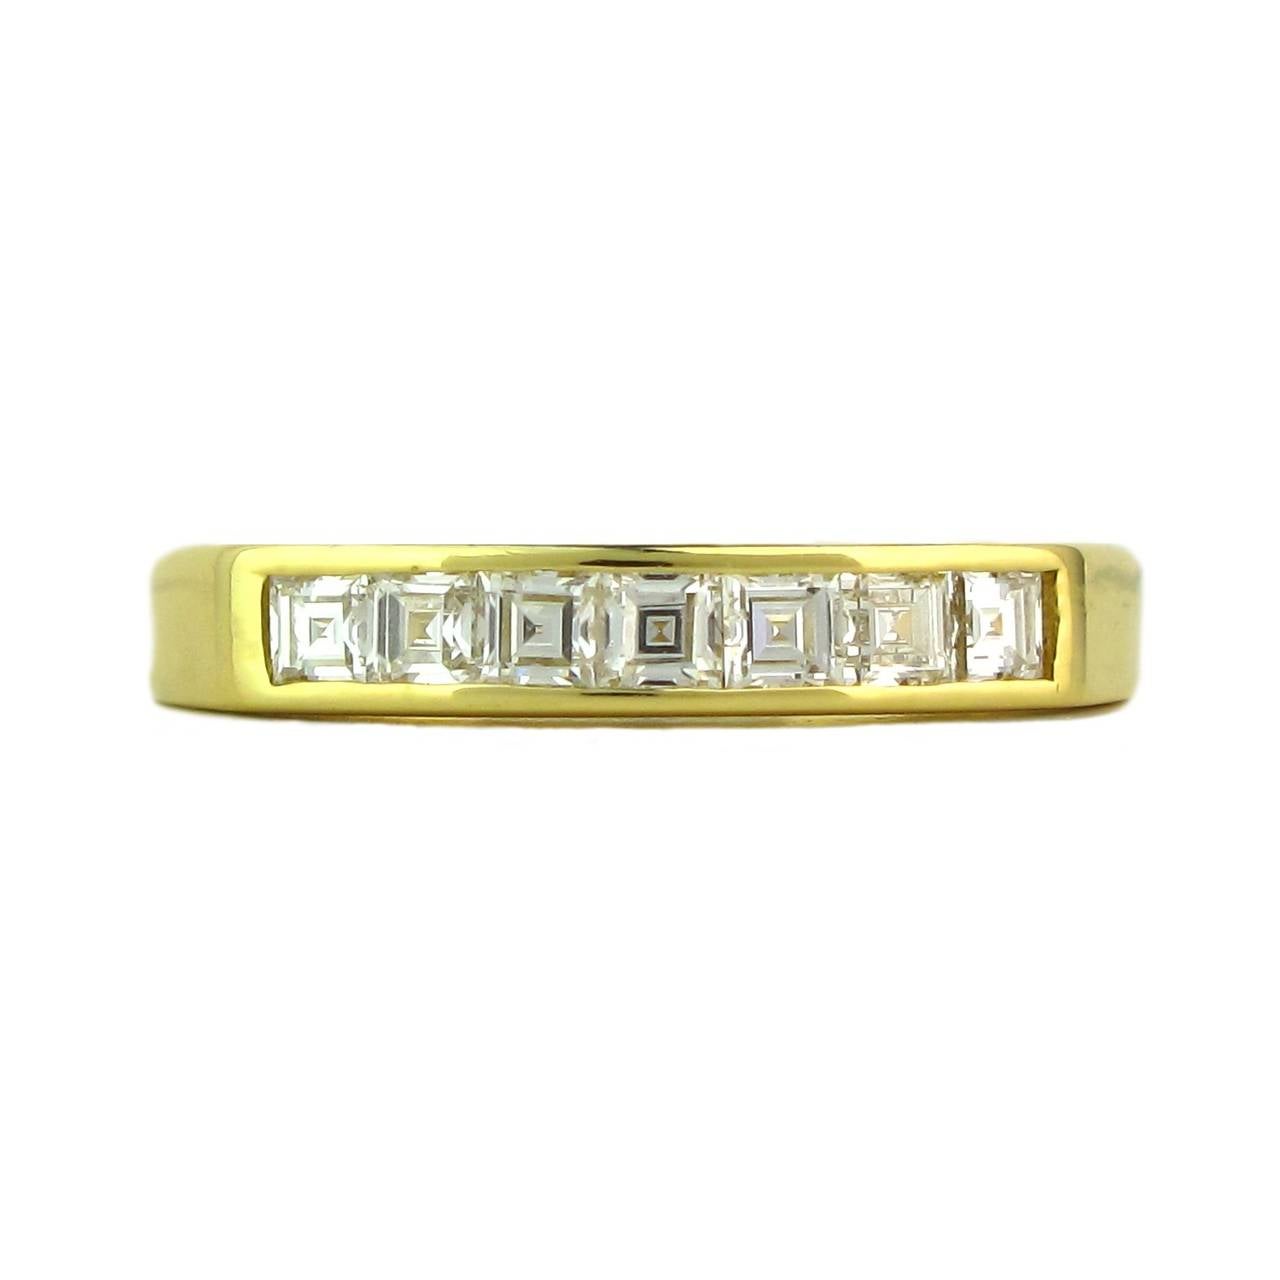 An 18ct yellow gold half channel eternity ring, comprising seven square step cut diamonds, estimated to weigh 0.44cts in total, G/H colour (near colourless), VS clarity (very slightly included - not visible to the naked eye). 

Designed by luxury